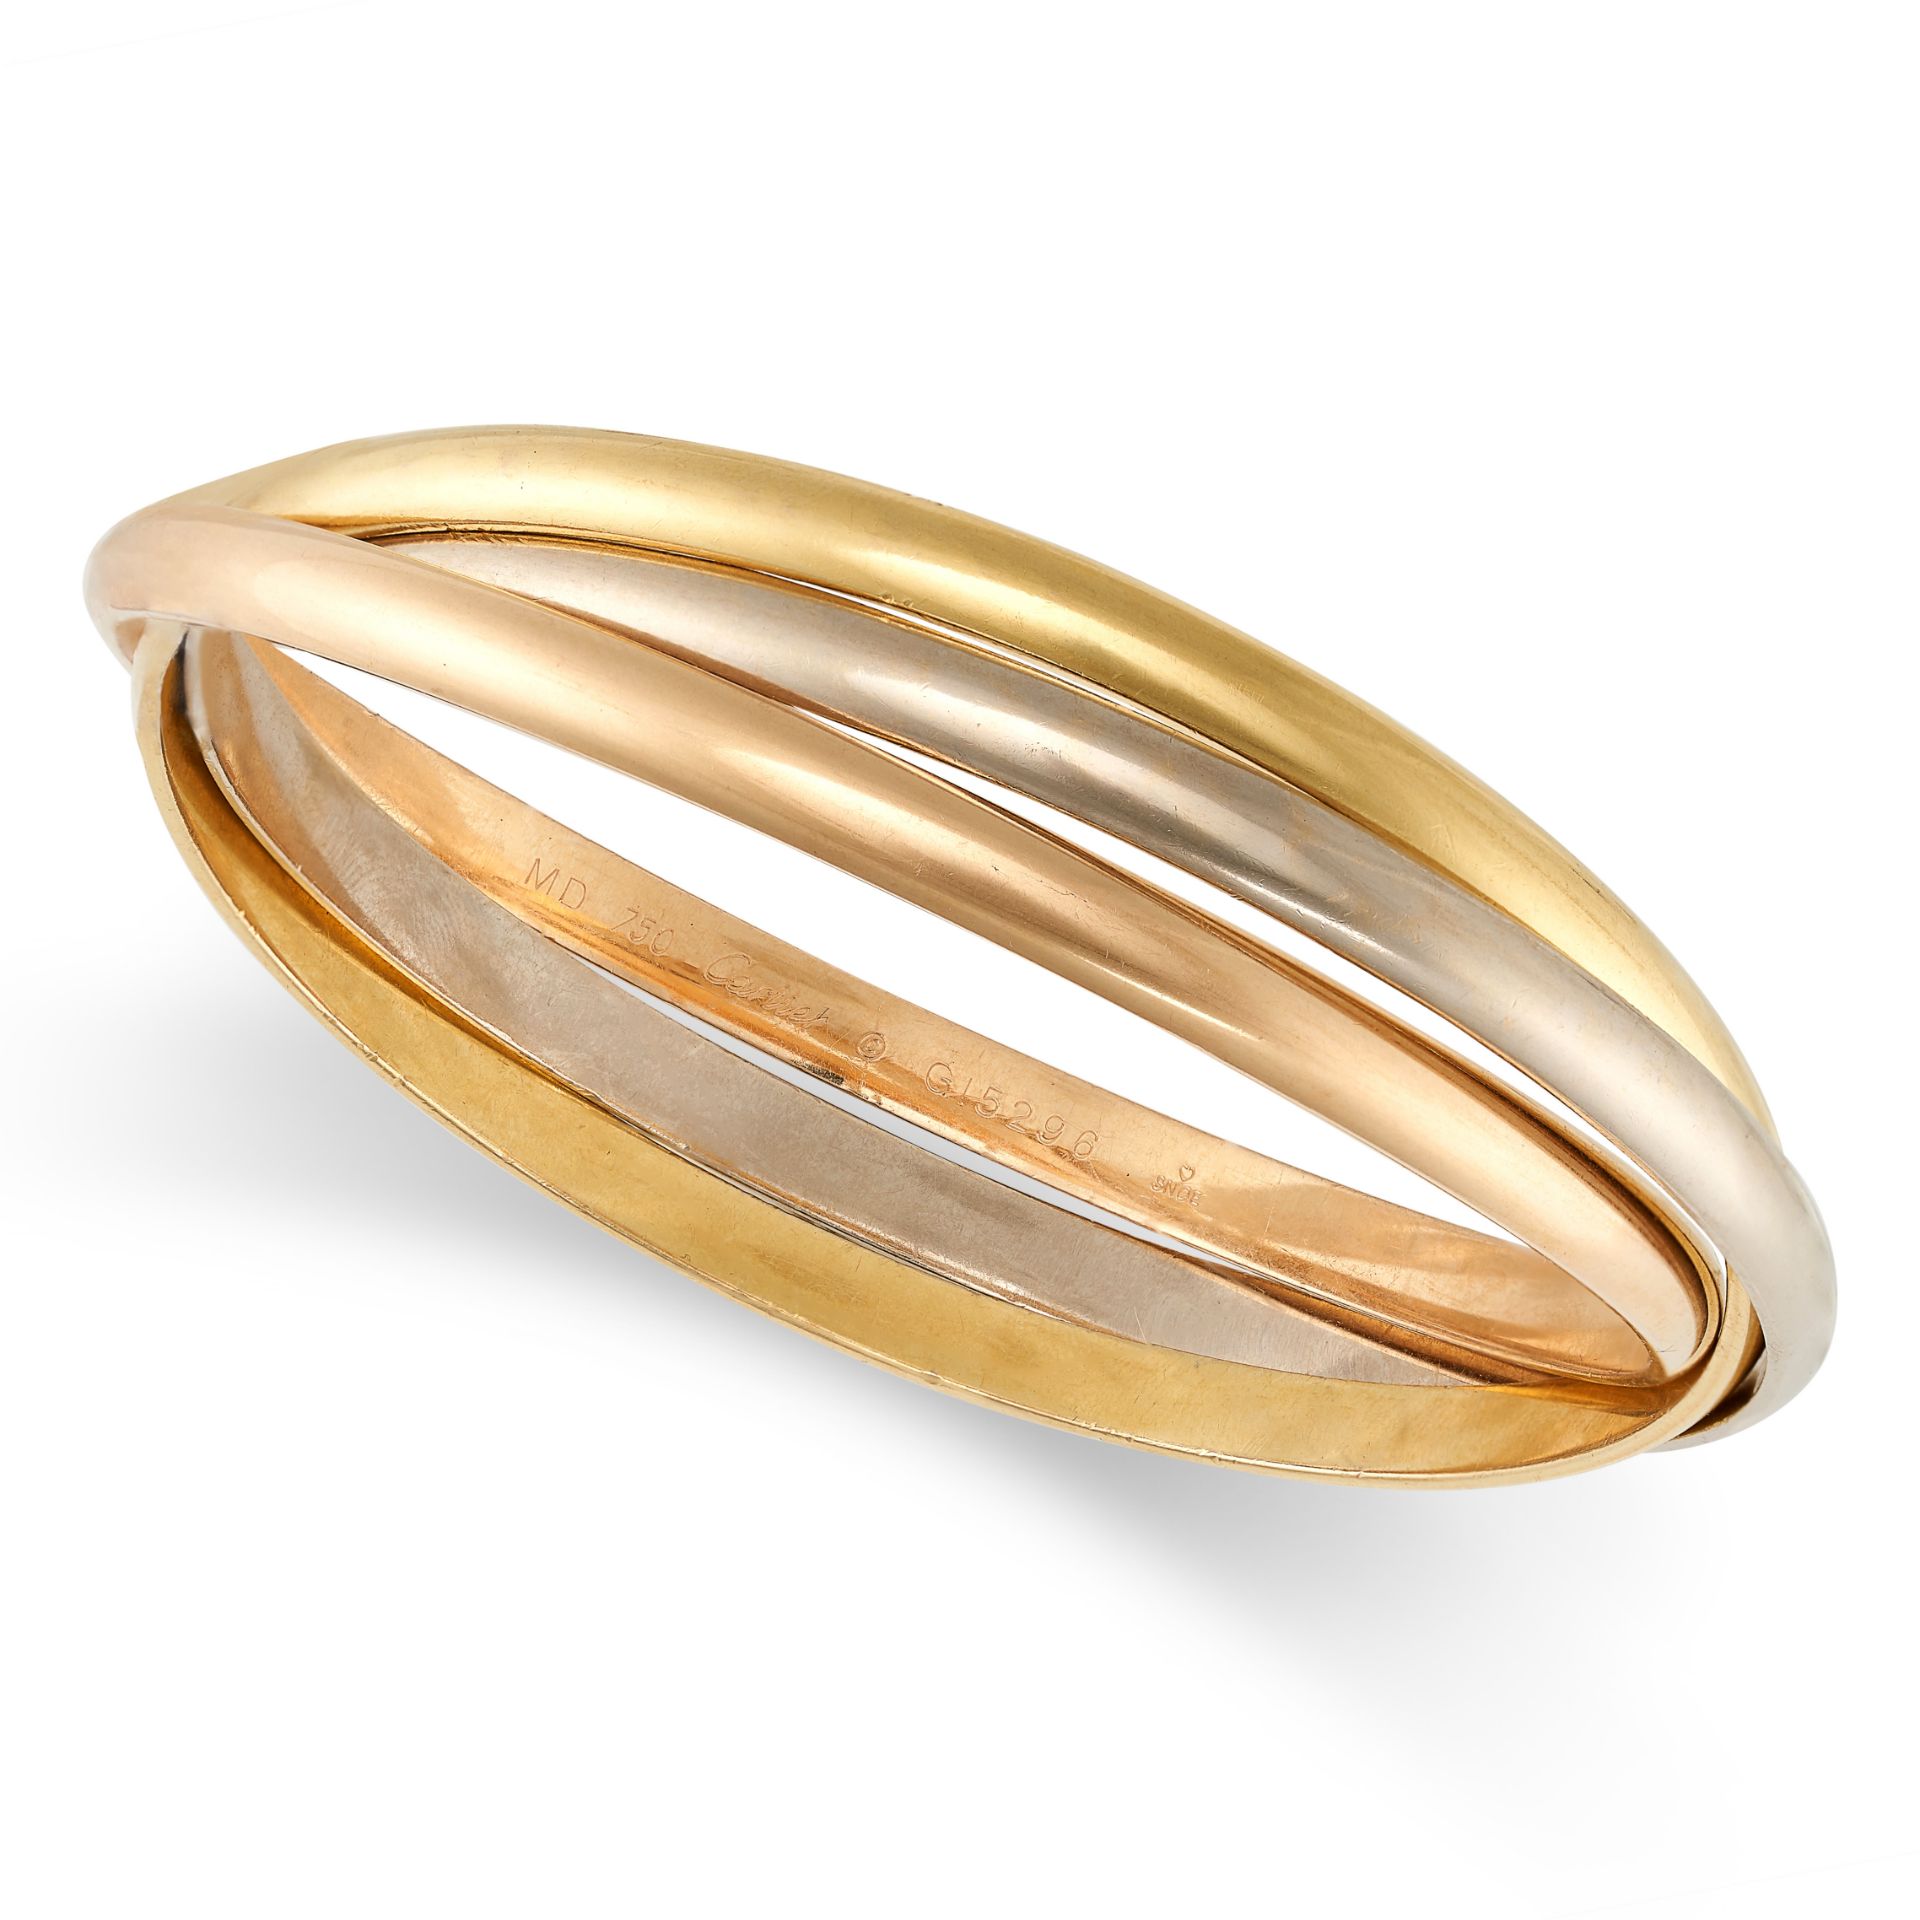 CARTIER, A TRINITY BANGLE in 18ct yellow, rose, and white gold, modelled as three interlocking